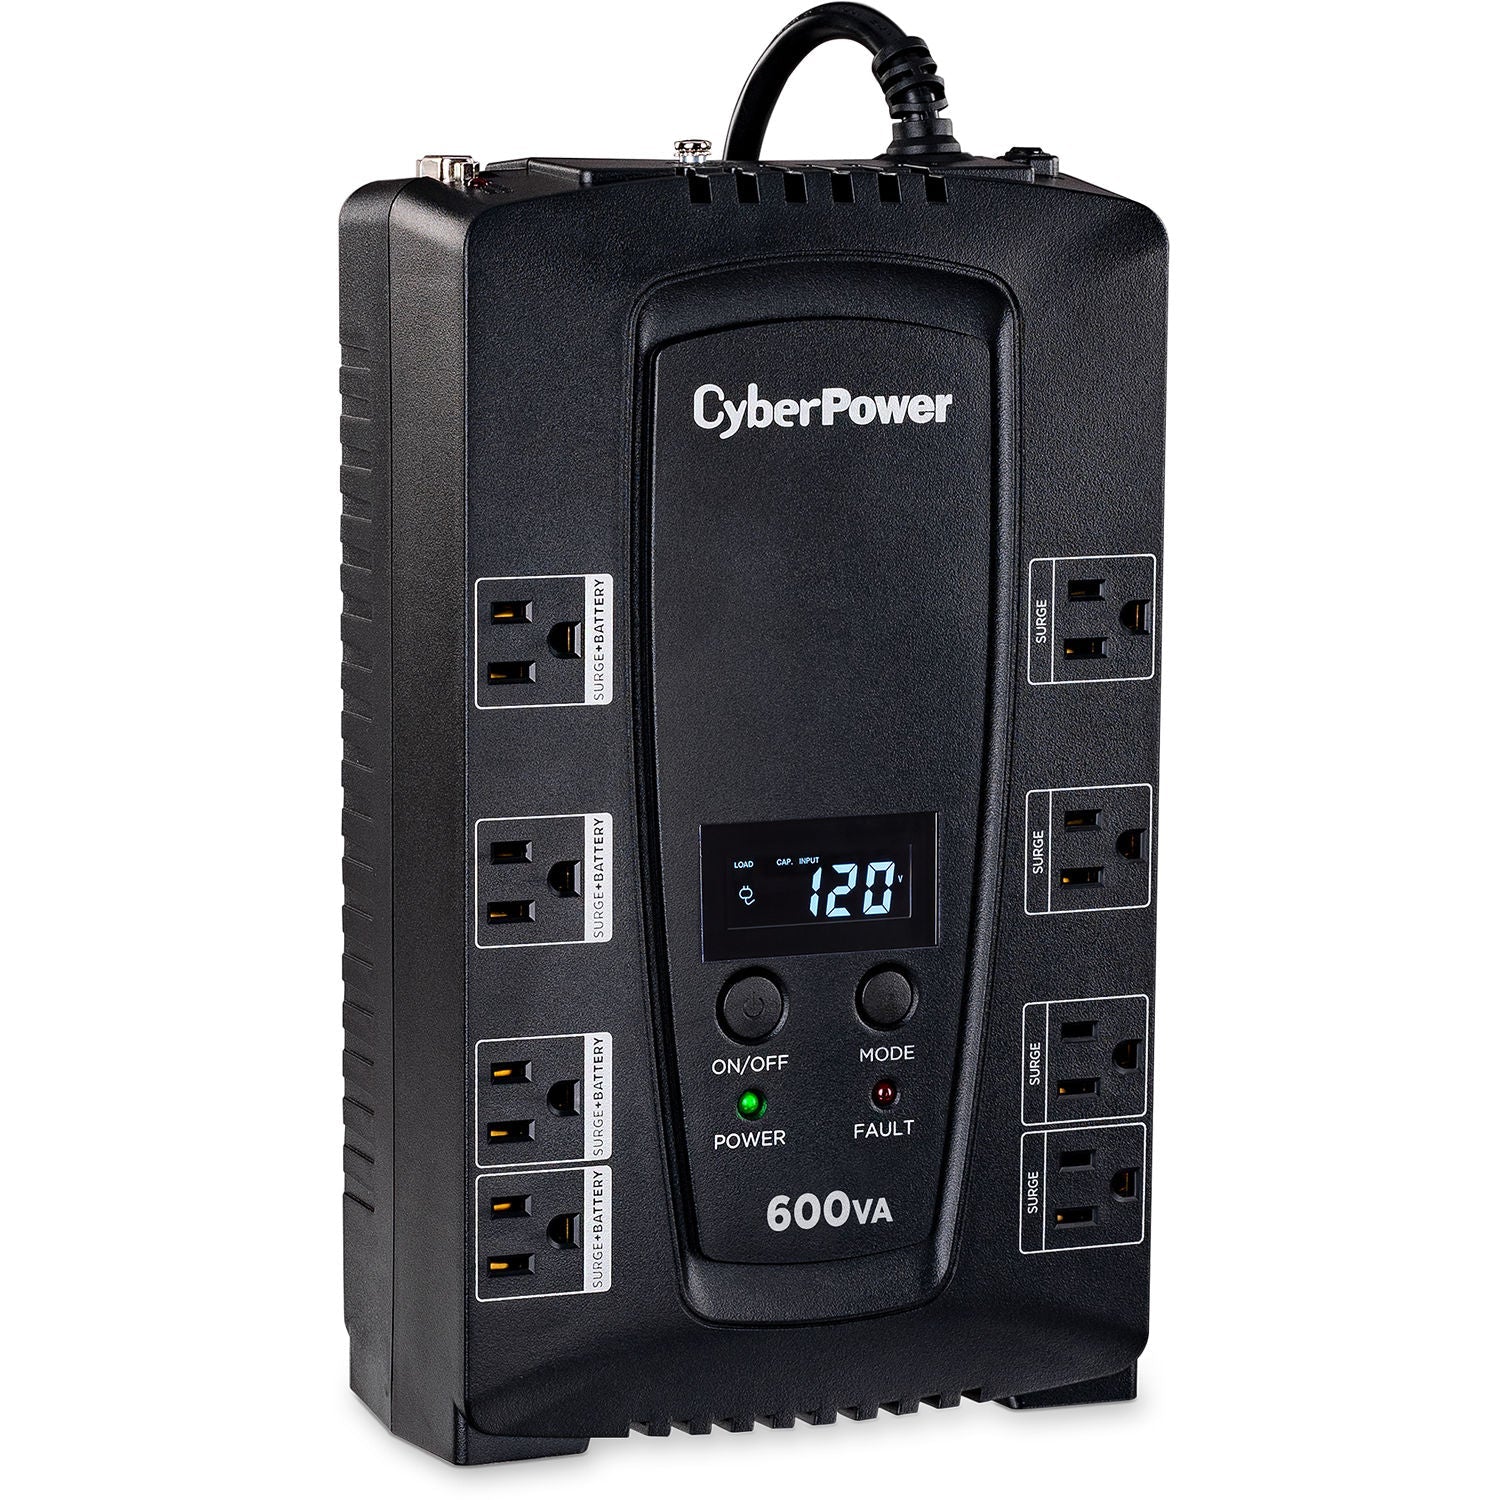 CyberPower CP600LCD-R 600VA/340W Intelligent LCD UPS System - New Battery Certified Refurbished